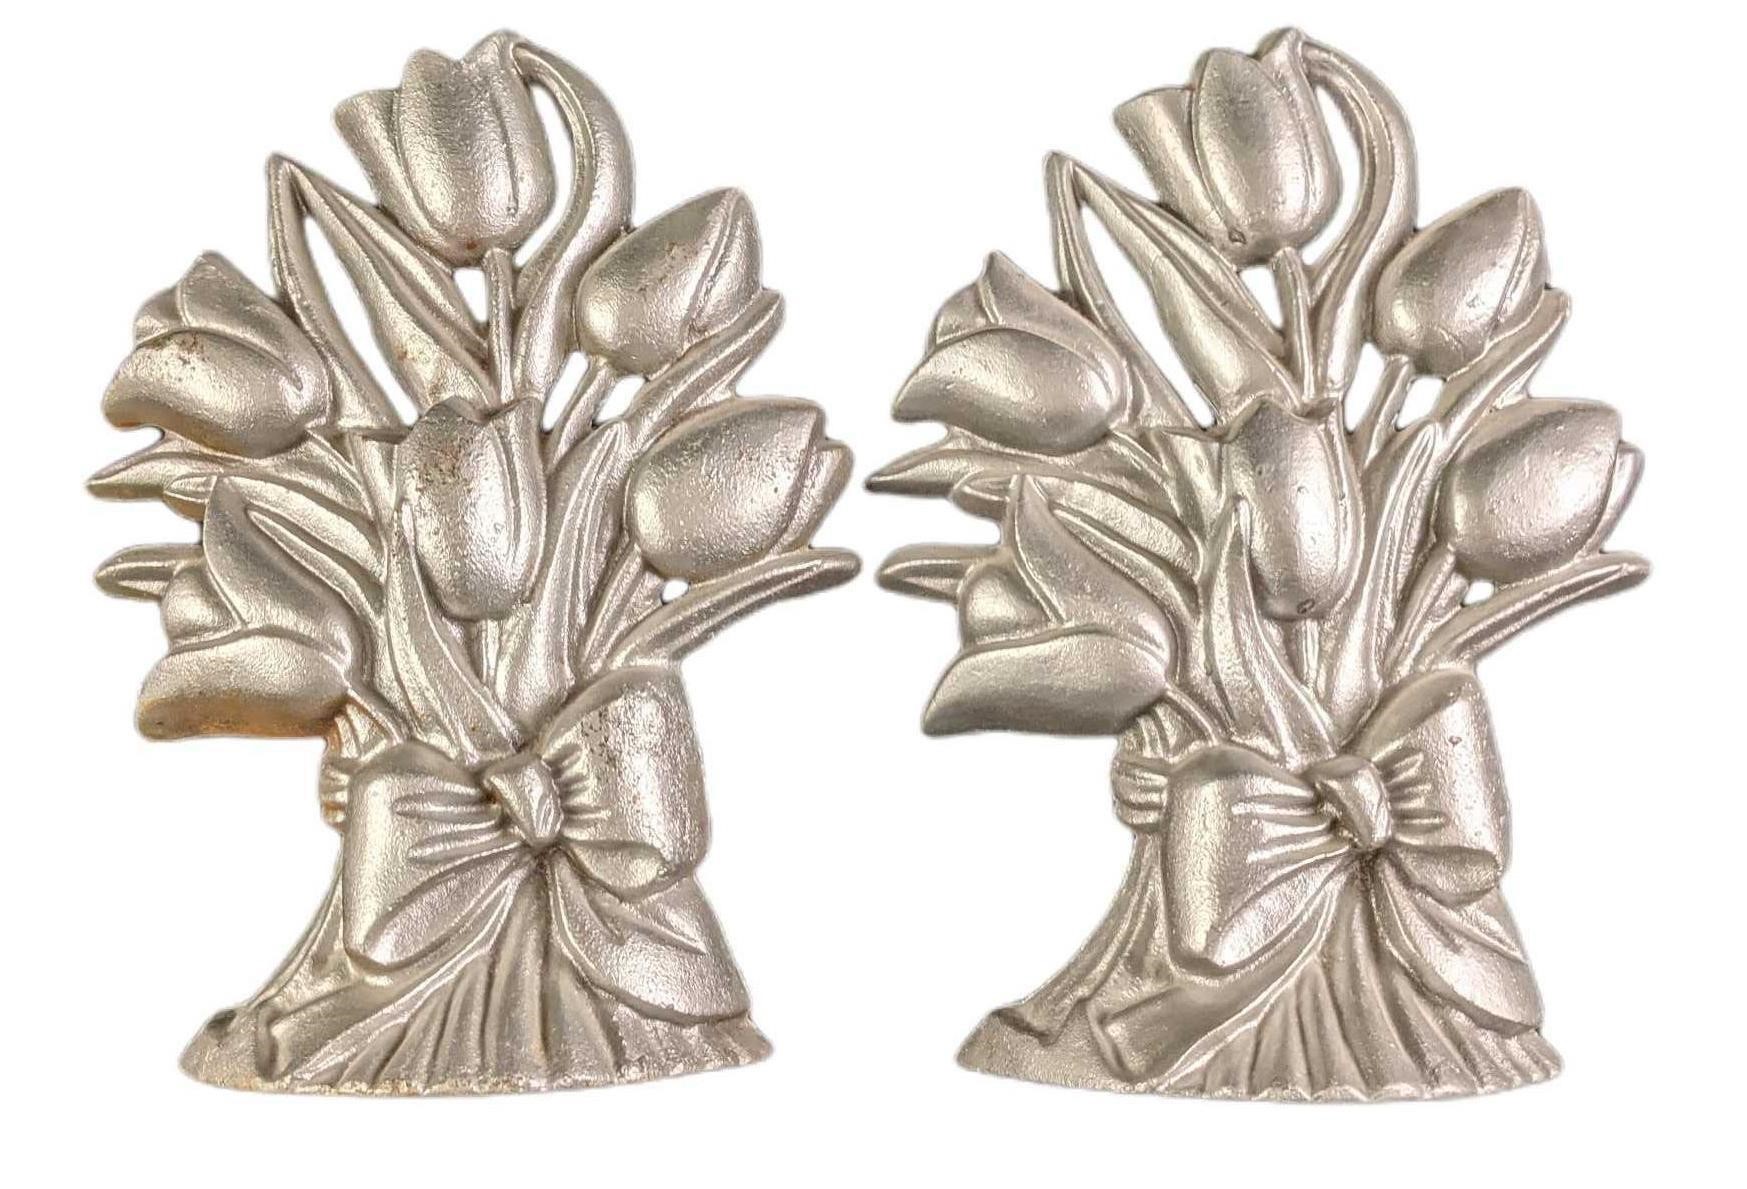 Vintage Silver Painted Cast Iron Flowers Bookends